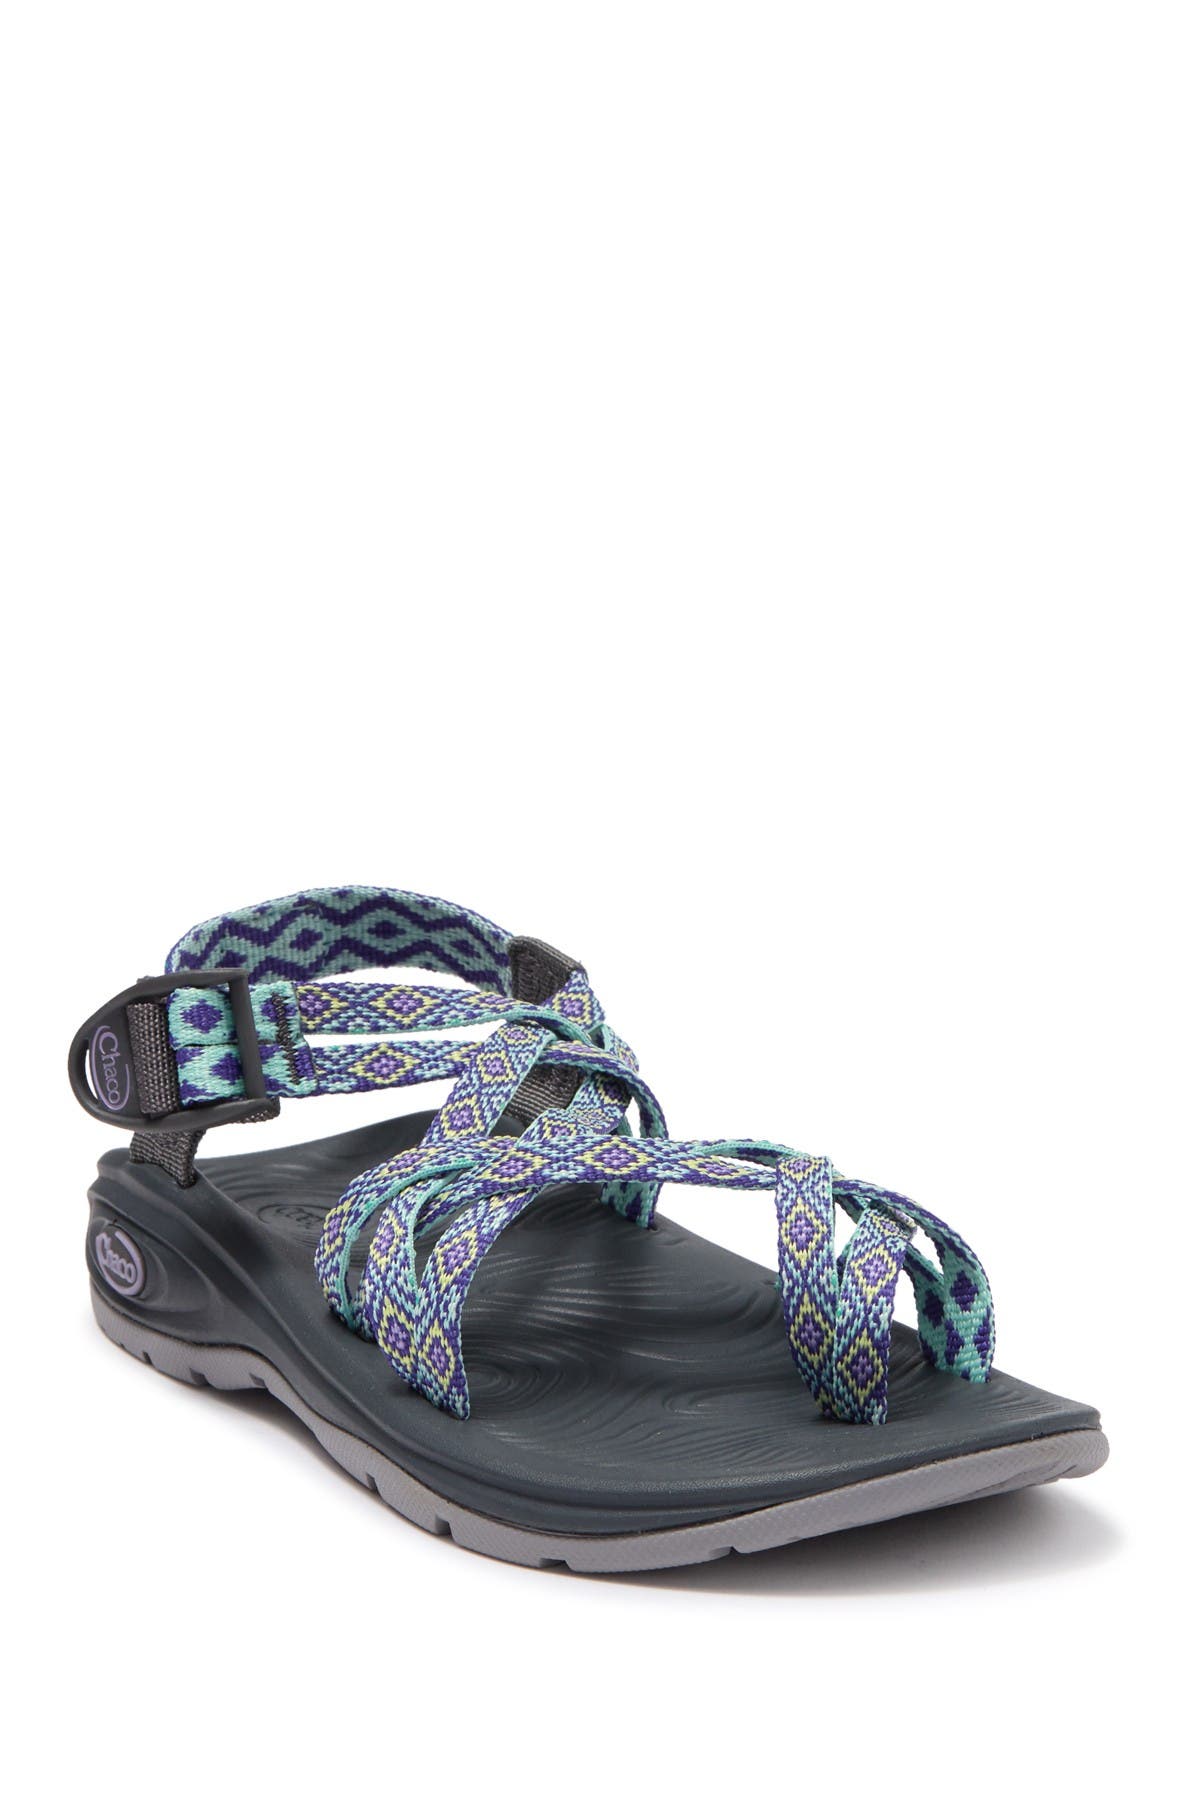 york violet chacos